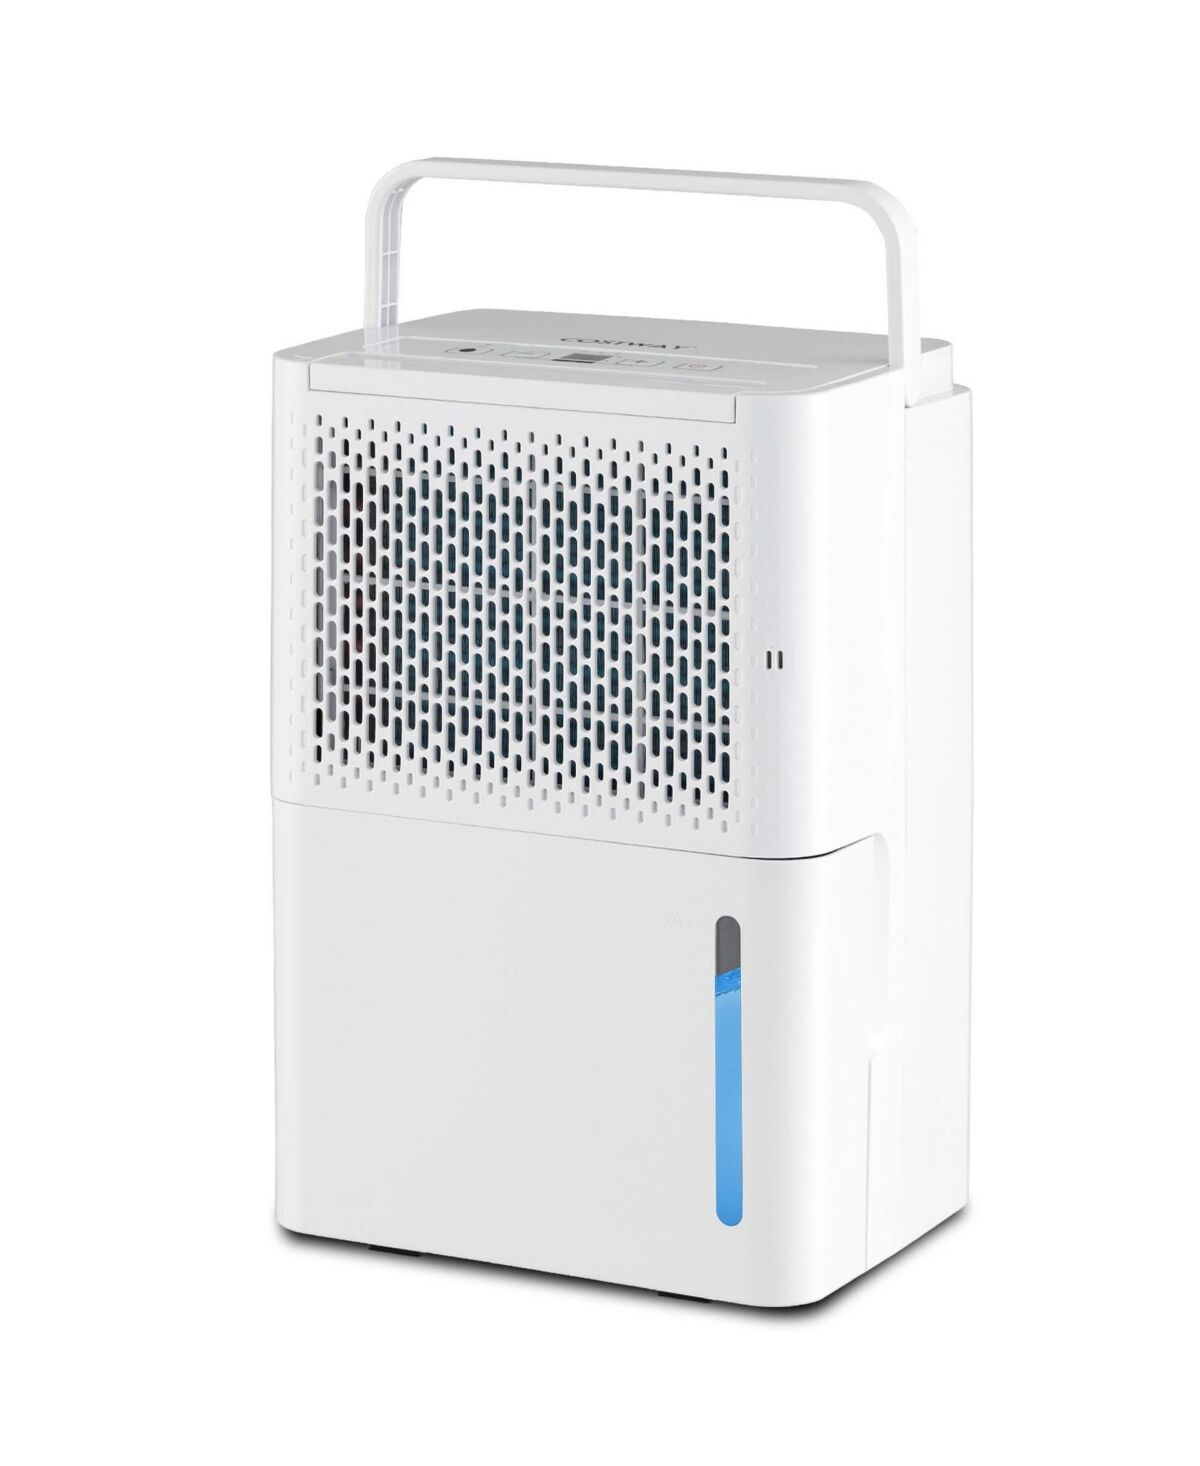 Costway 32 Pint Dehumidifier 2000 Sq. Ft Portable with 3 Modes & 24H Timer - White